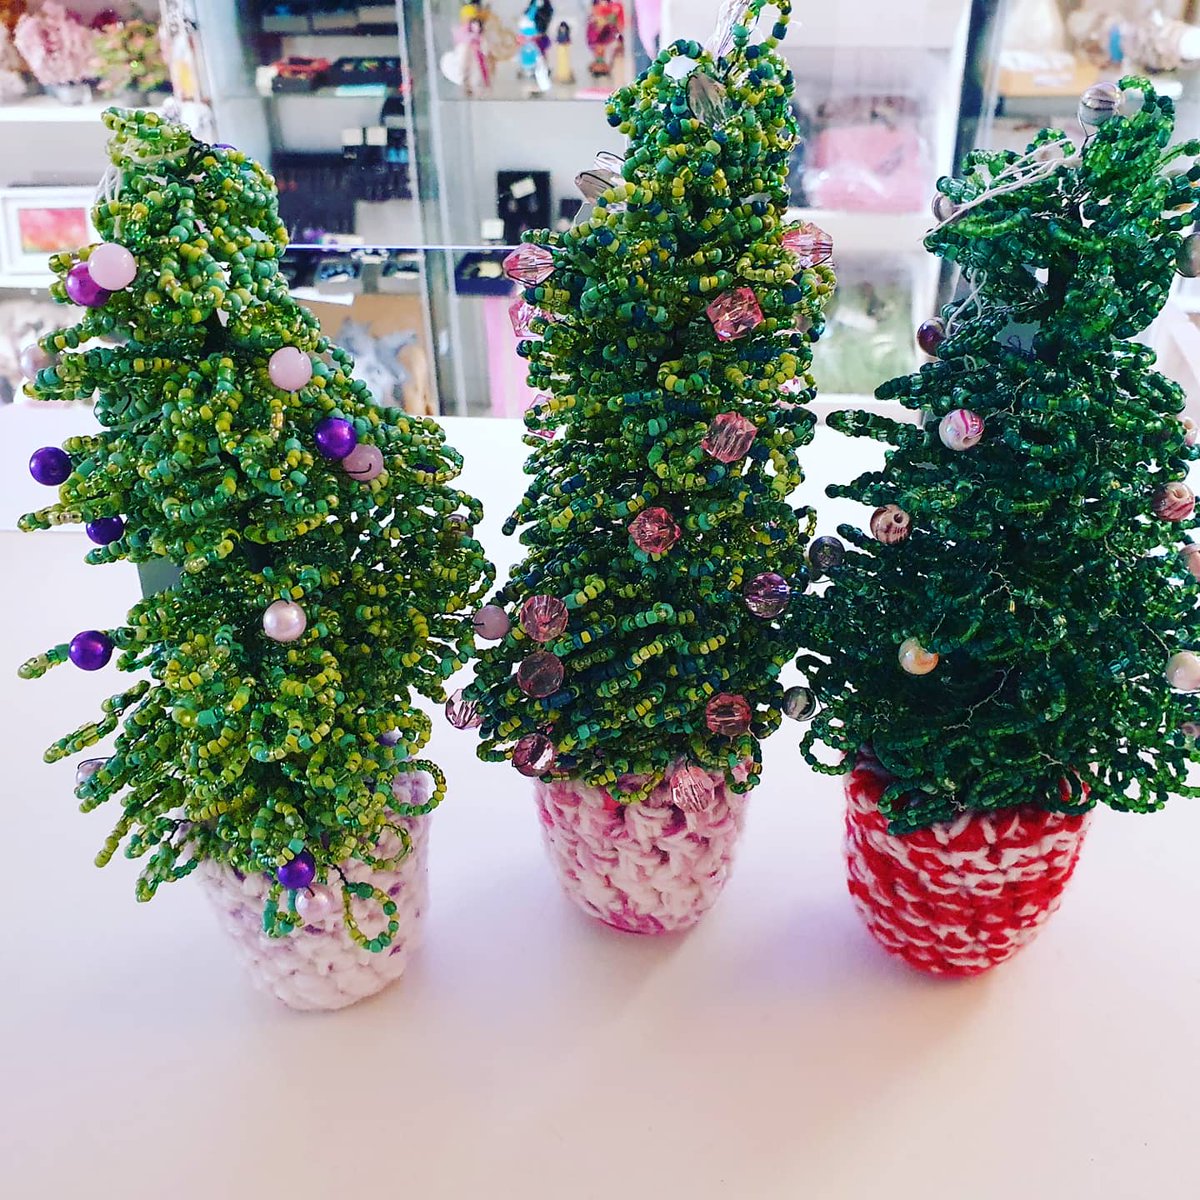 Oh my 🎄 🥰 check out these cute wee Christmas trees 🌲 and I challenge you to look really close... these are make up of hundreds of tiny wee beads 🥰 these have been made by facebook.com/Home-Decor-by-… #homedecorbyaistecarpenter #no26 #handmadewithlove #handmade